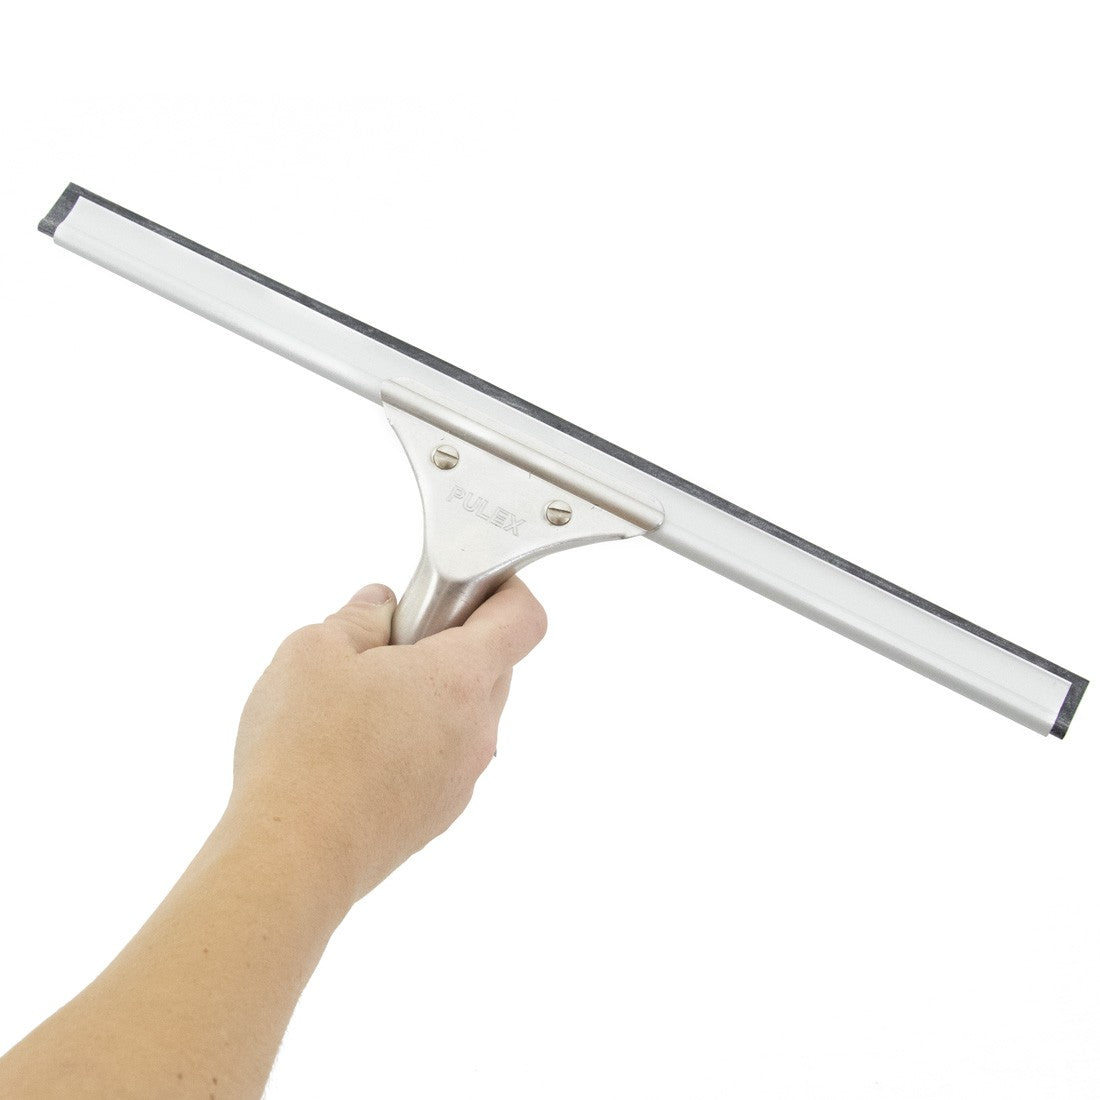 Pulex Complete UltraLite Aluminum Squeegee In Hand View